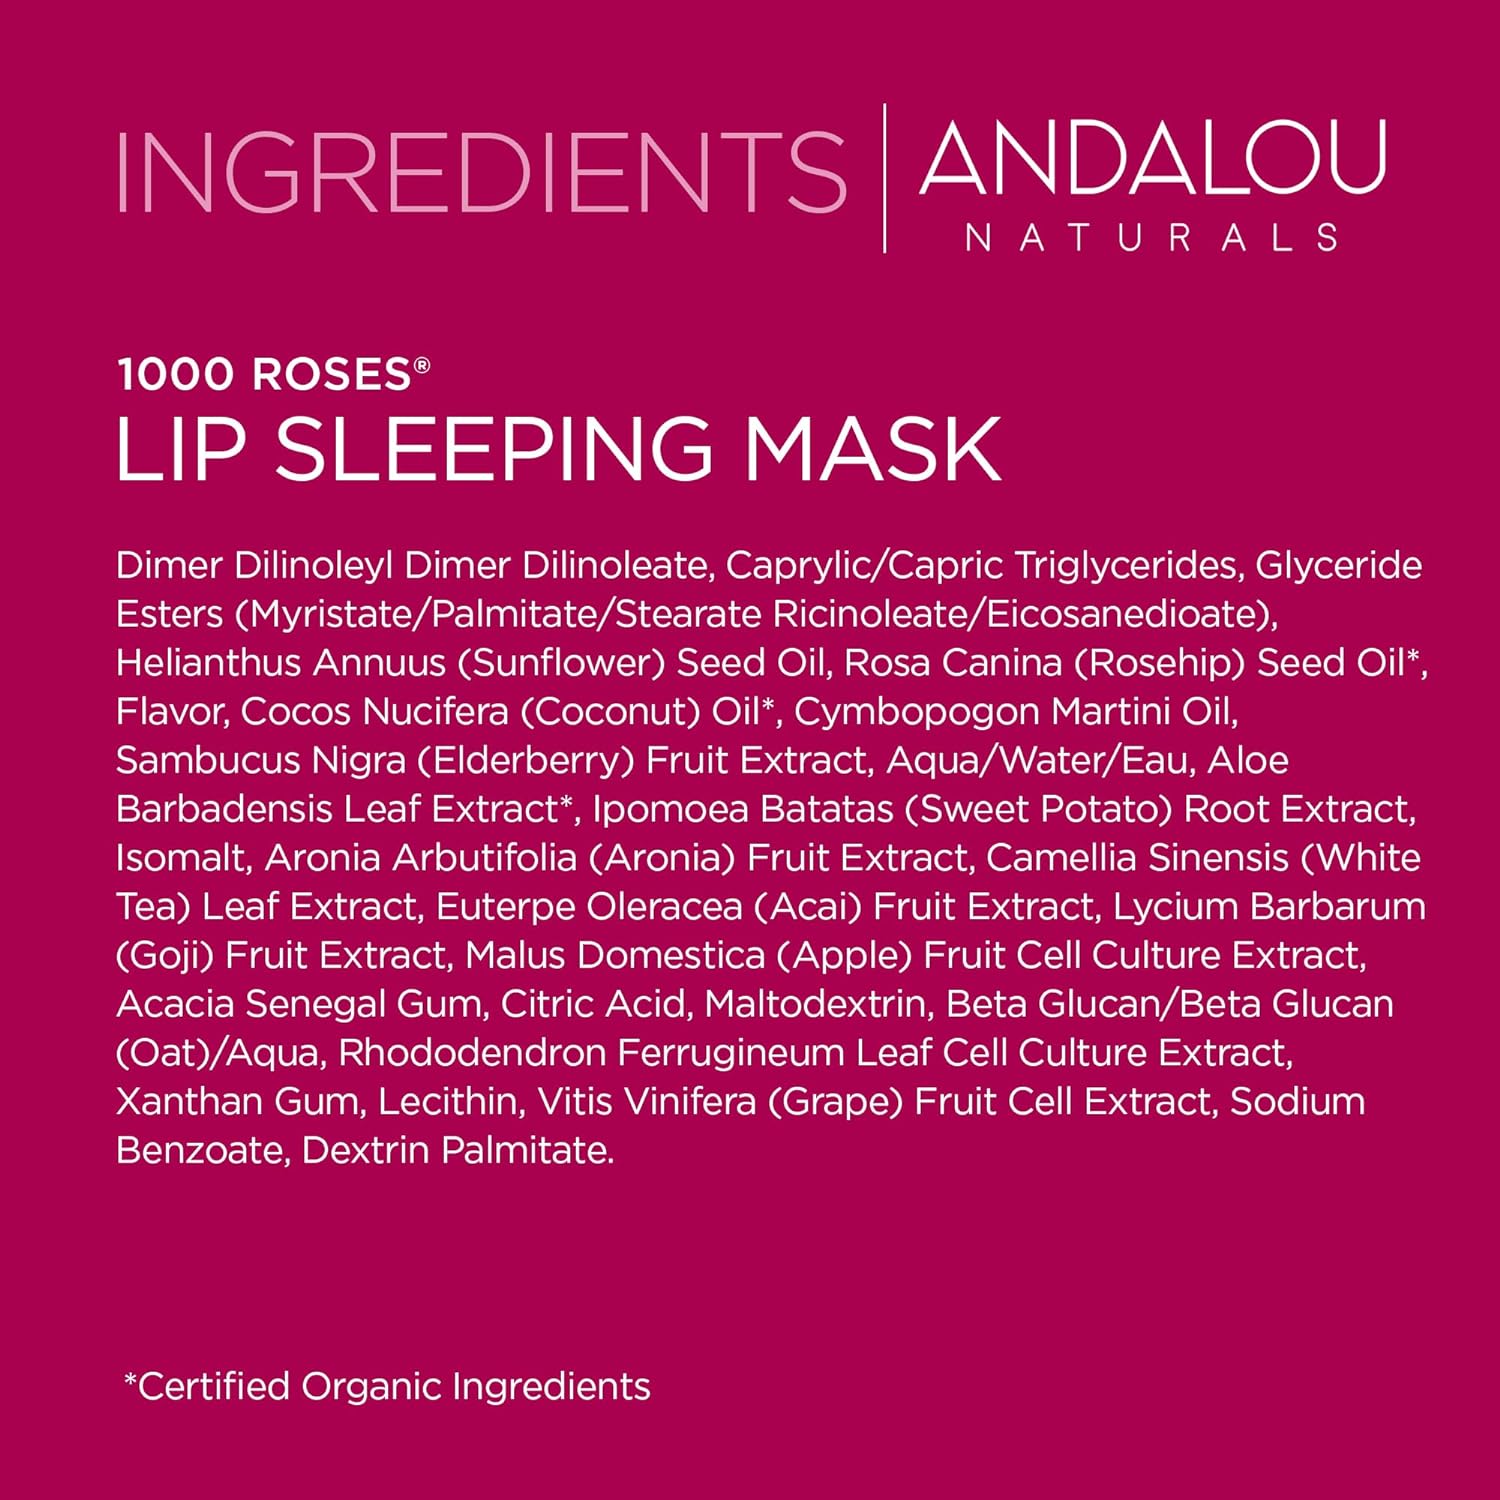 Andalou Naturals Lip Mask 1000 ROSES, Overnight Lip Sleeping Mask for Dry, Chapped Lips, Plumping, Hydrating & Soothing Lip Balm with Alpine Rose Stem Cells, Vegan & Cruelty-Free, 0.42 Oz : Everything Else